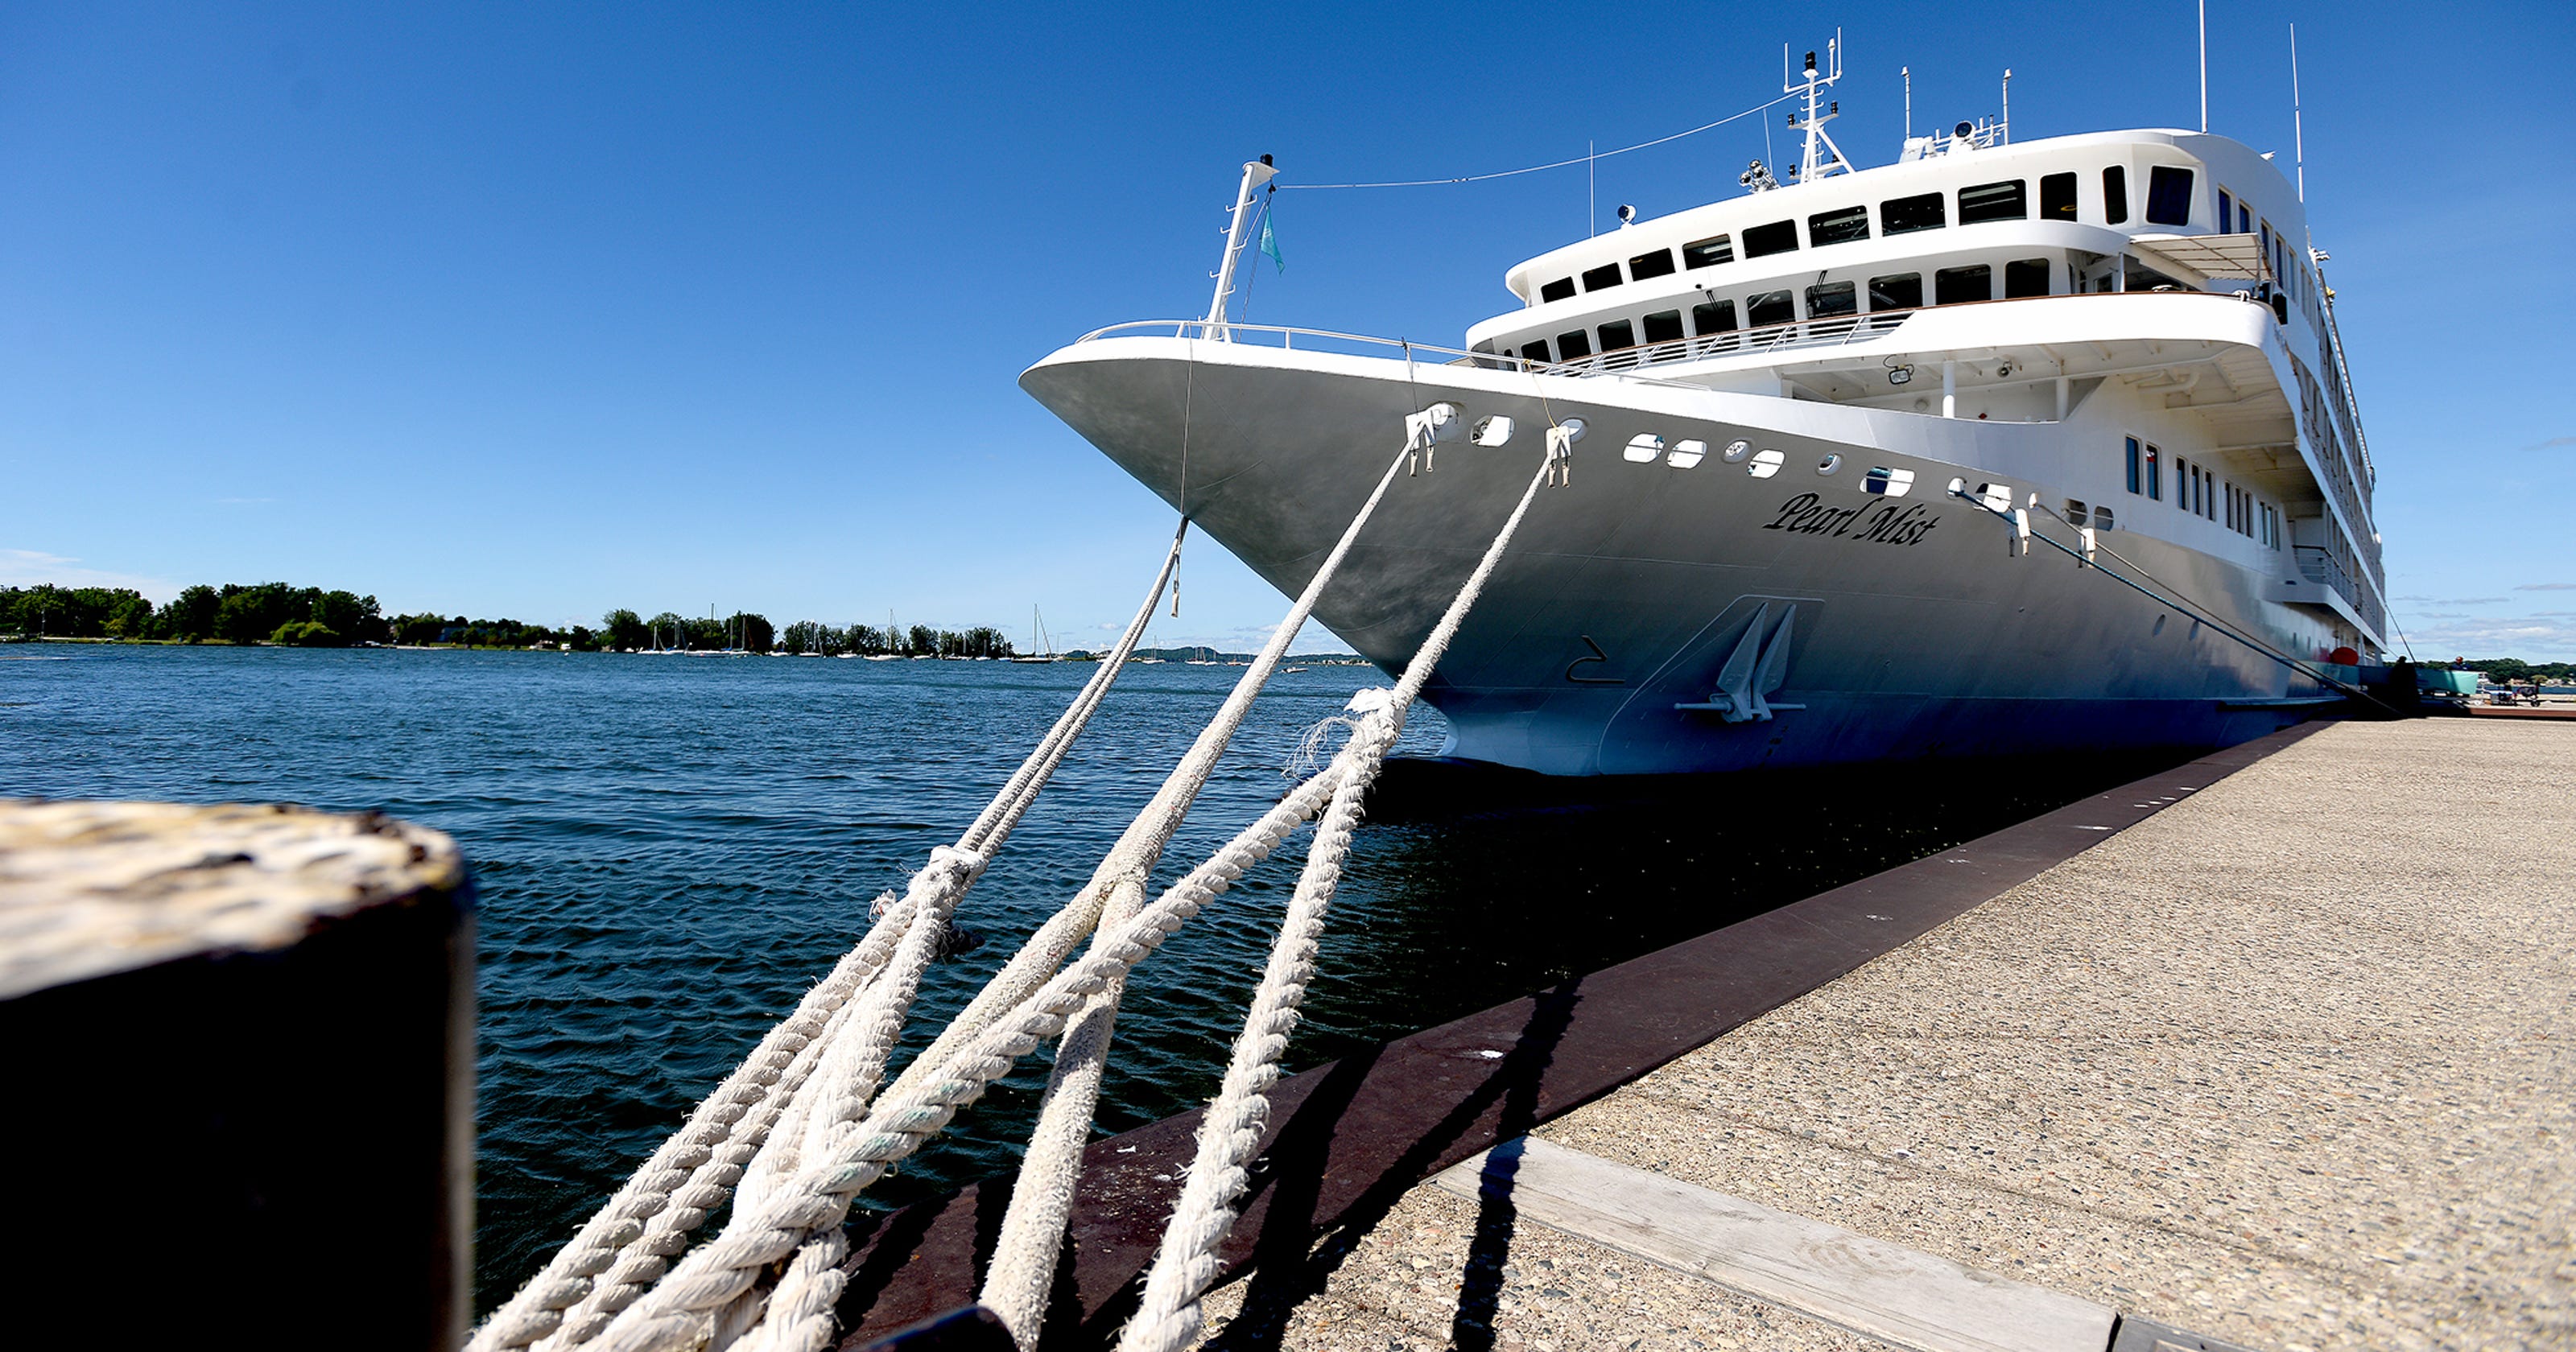 Are the Great Lakes an cruise destination?